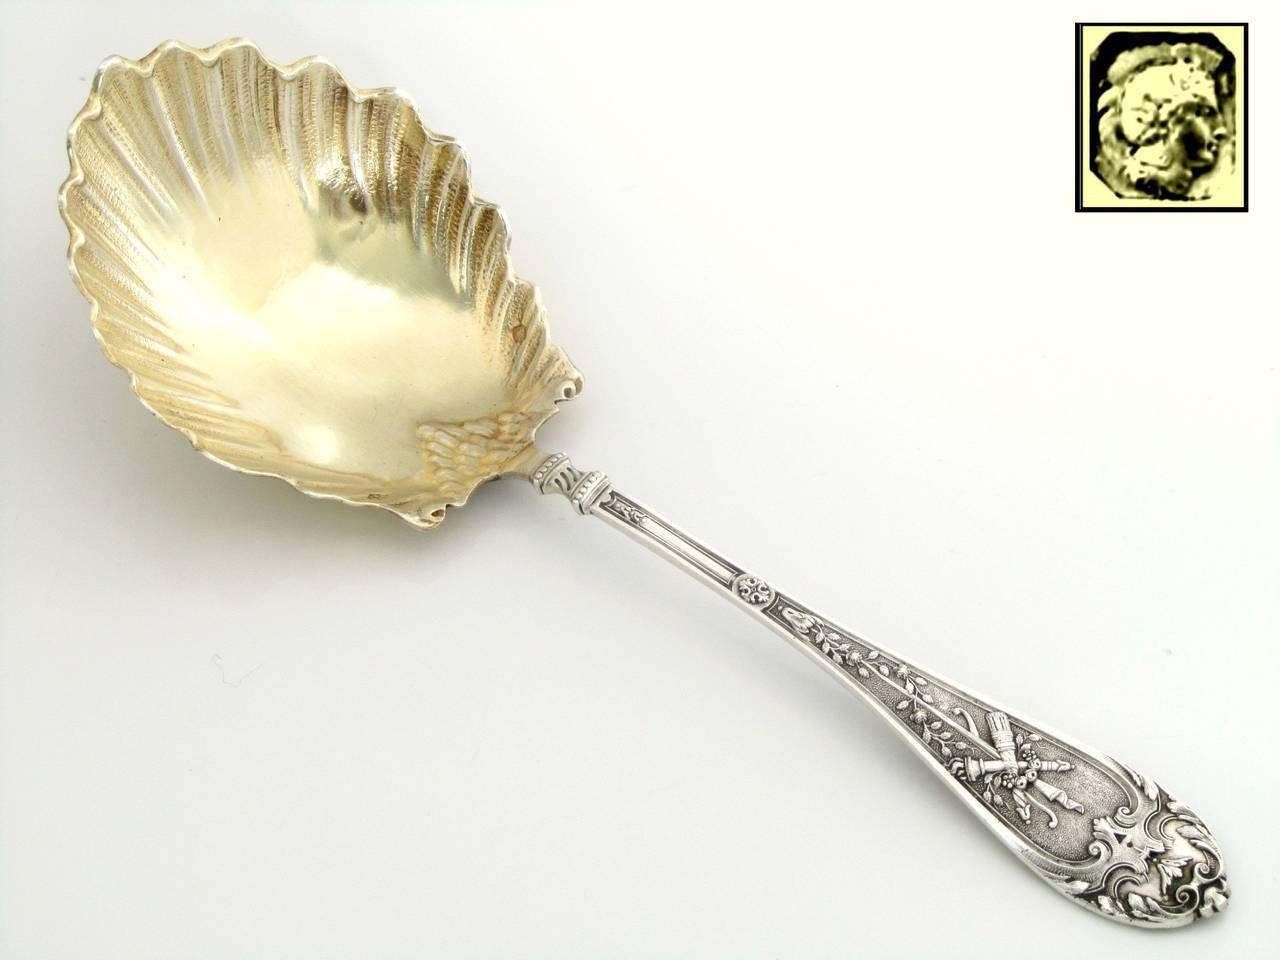 Late 19th Century Ernie French All Sterling Silver 18K Gold Serving Spoon with Original Box Torch